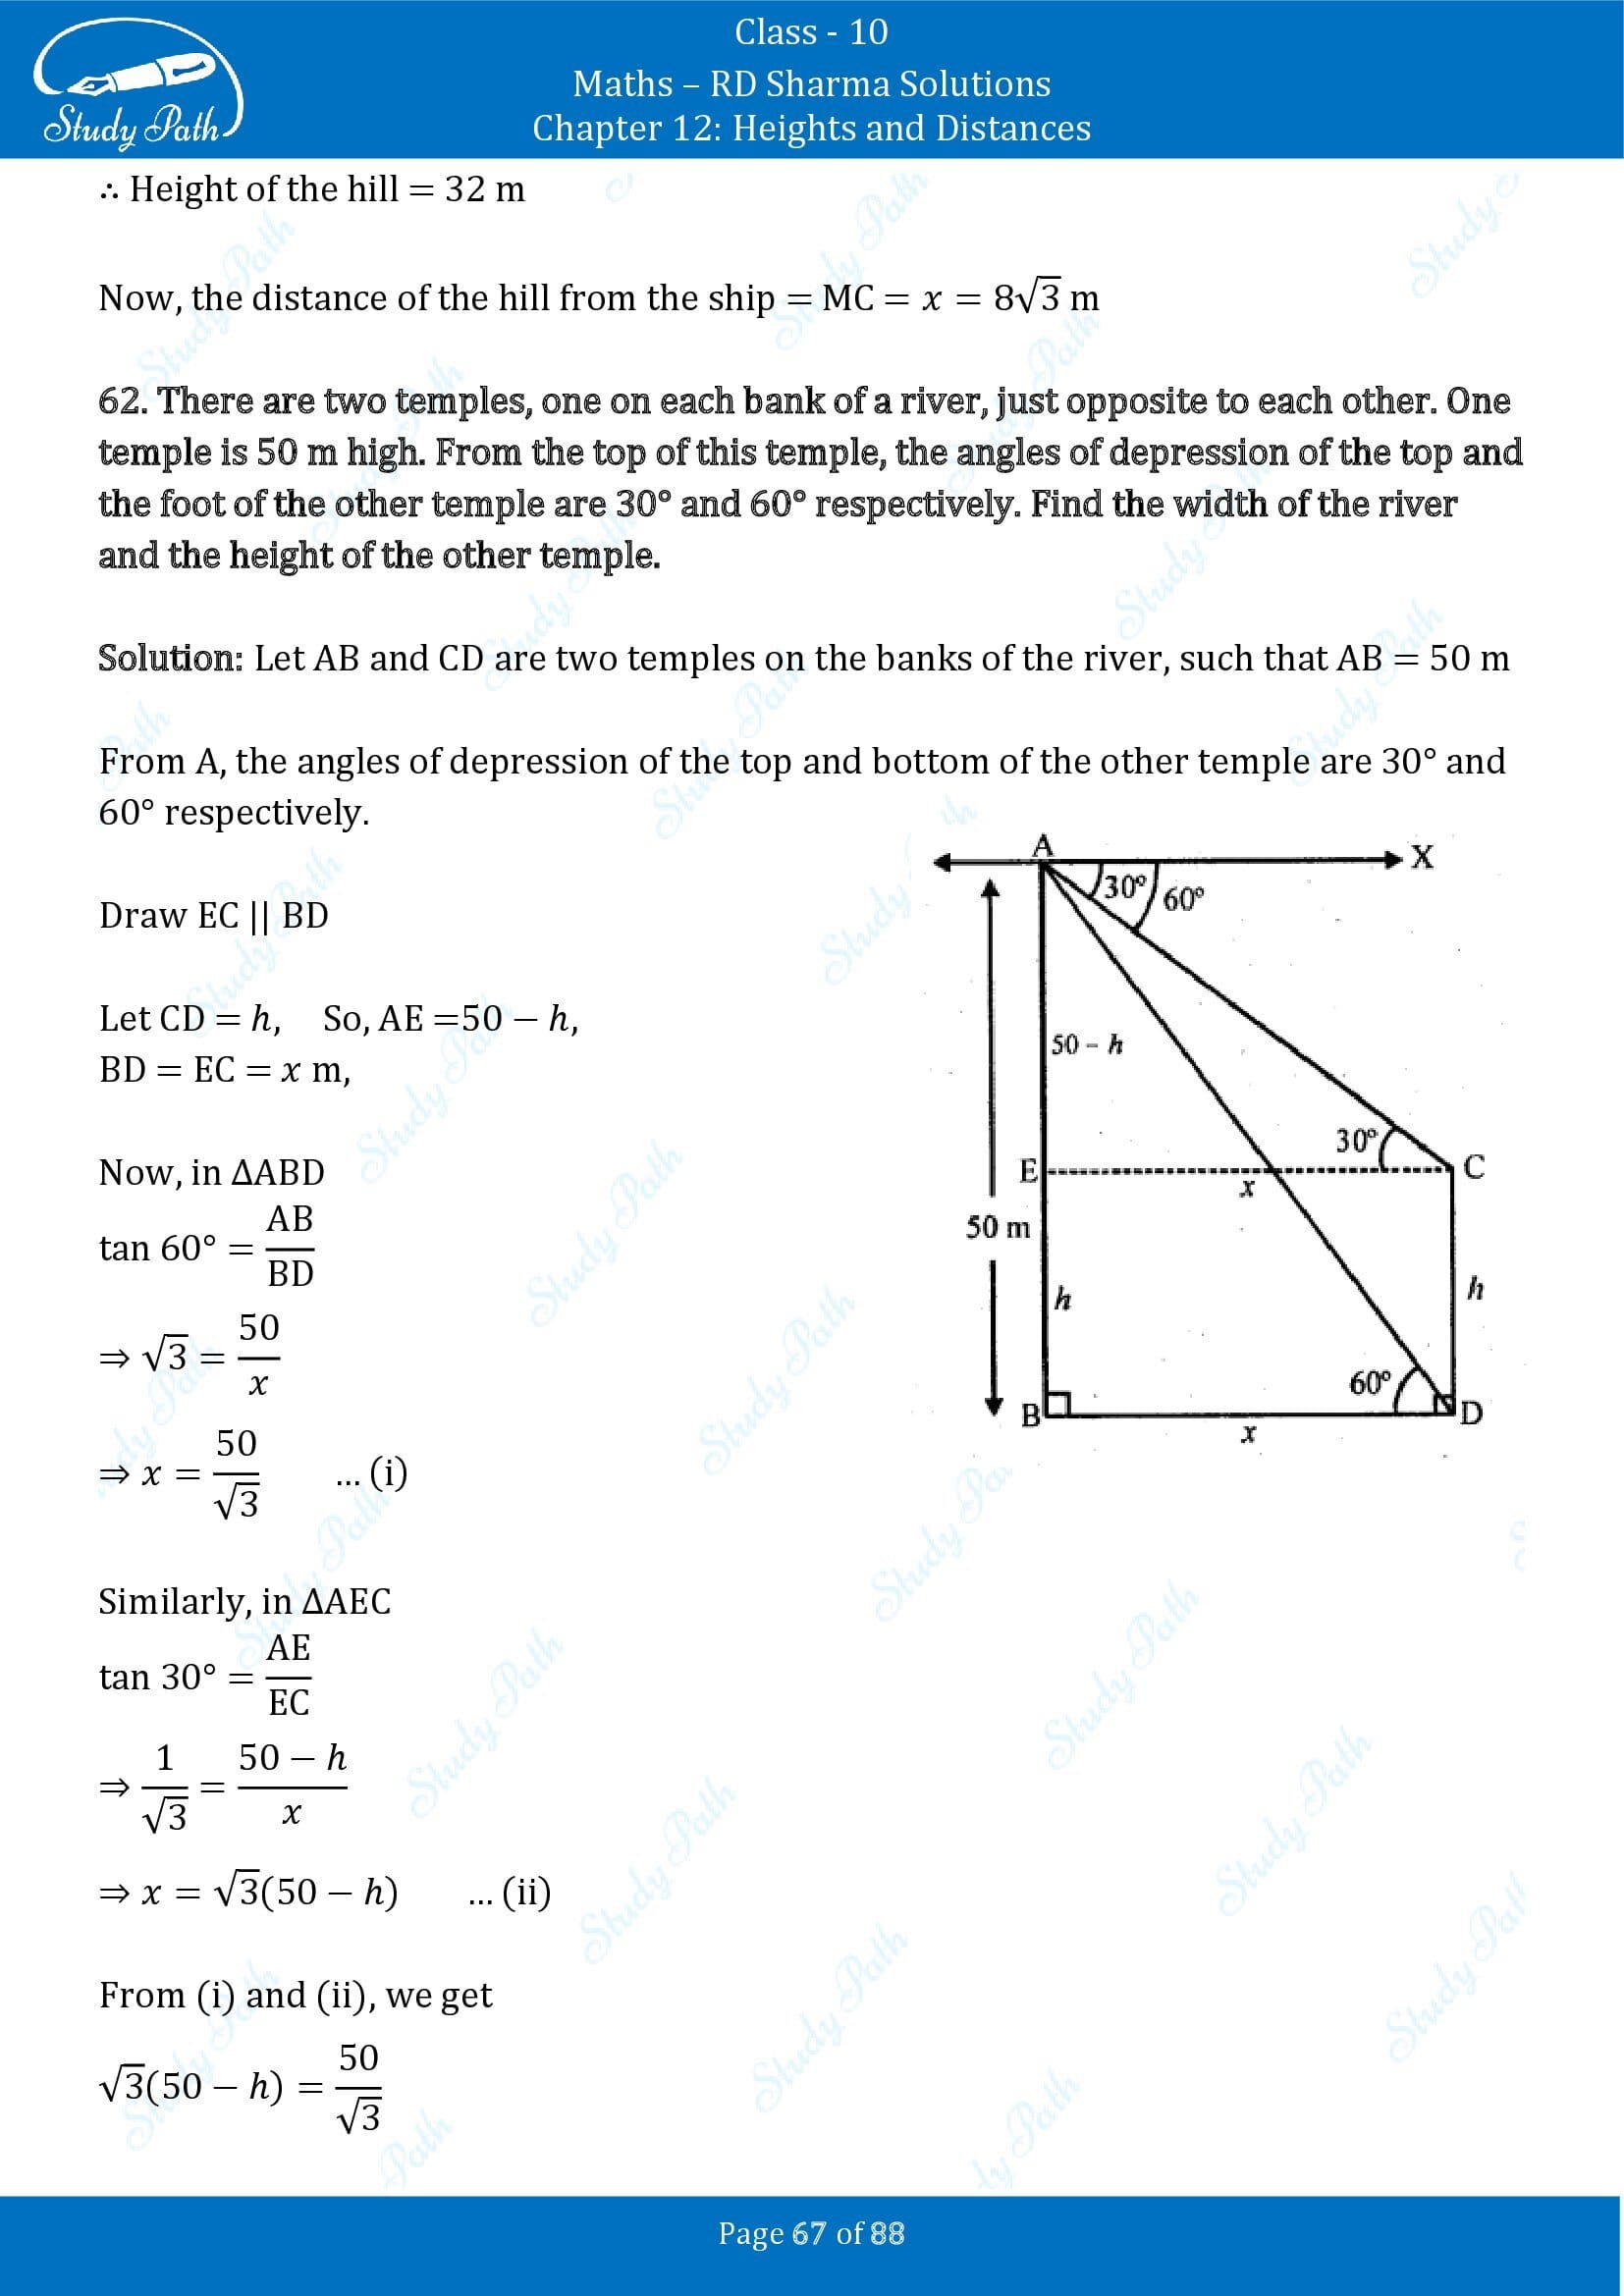 RD Sharma Solutions Class 10 Chapter 12 Heights and Distances Exercise 12.1 00067